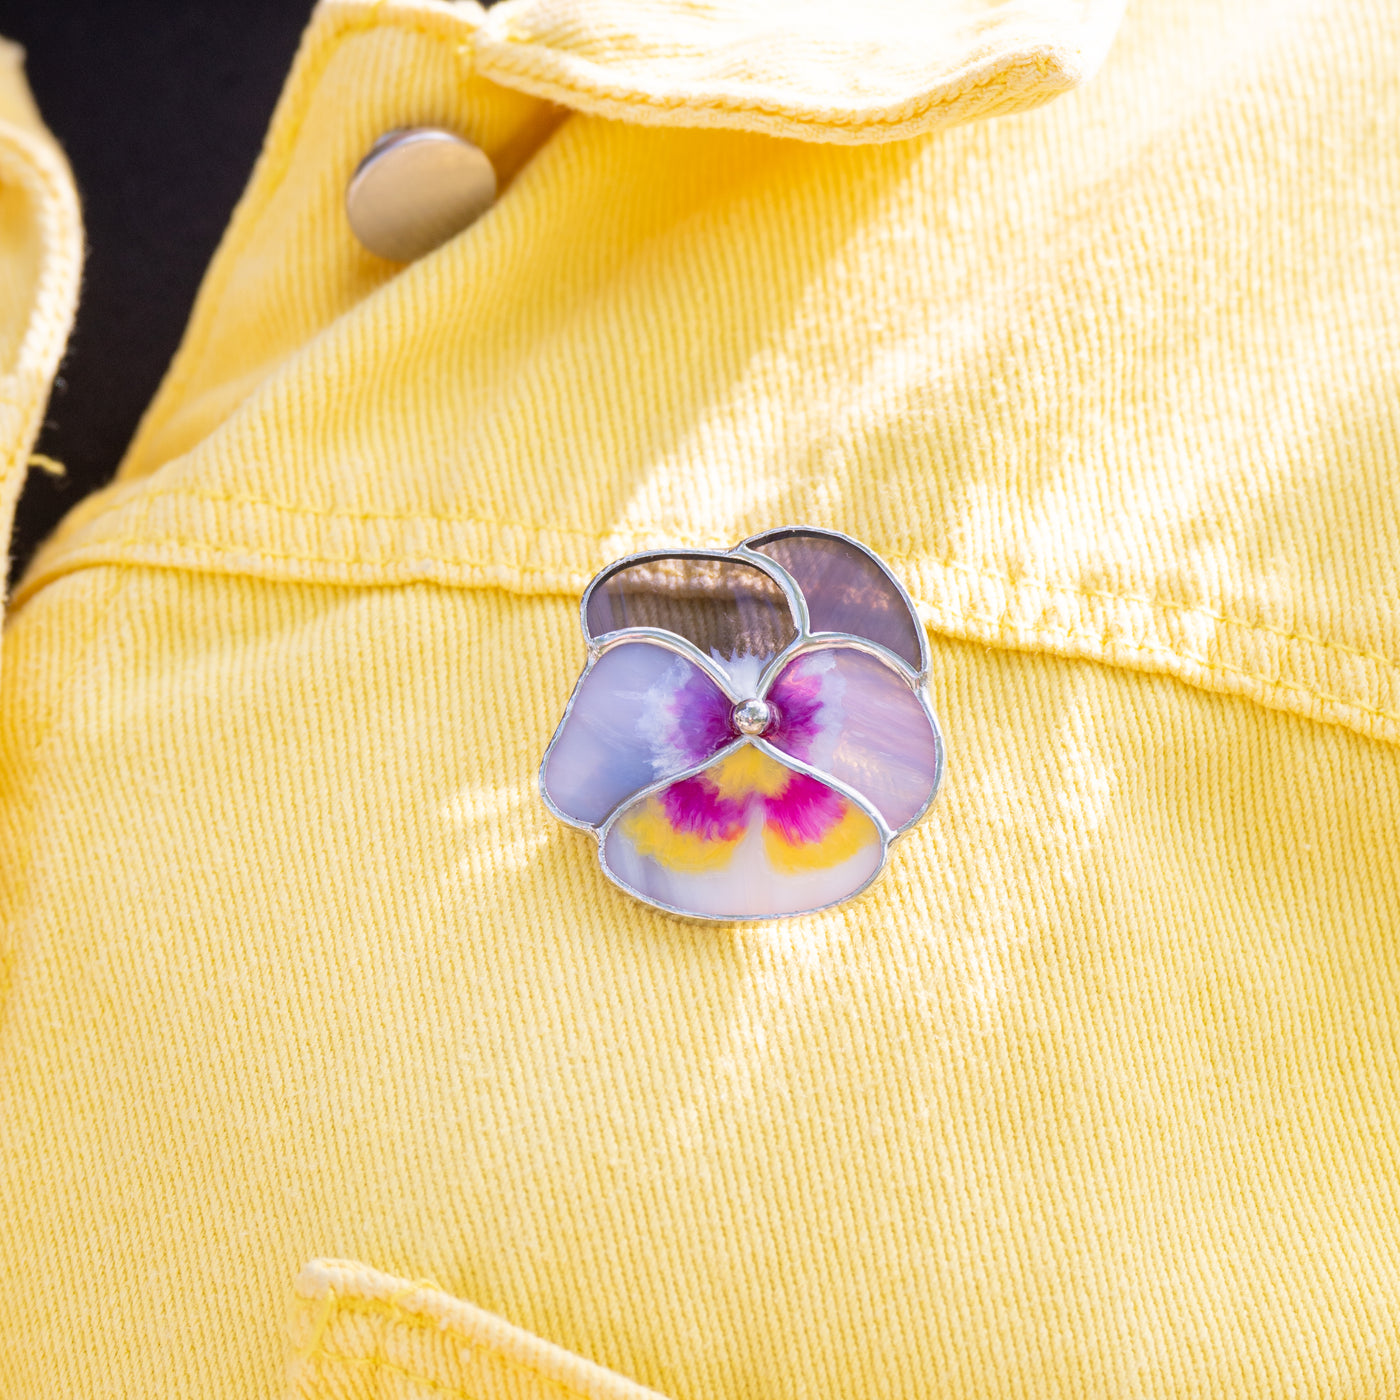 Stained glass purple pansy flower pin 